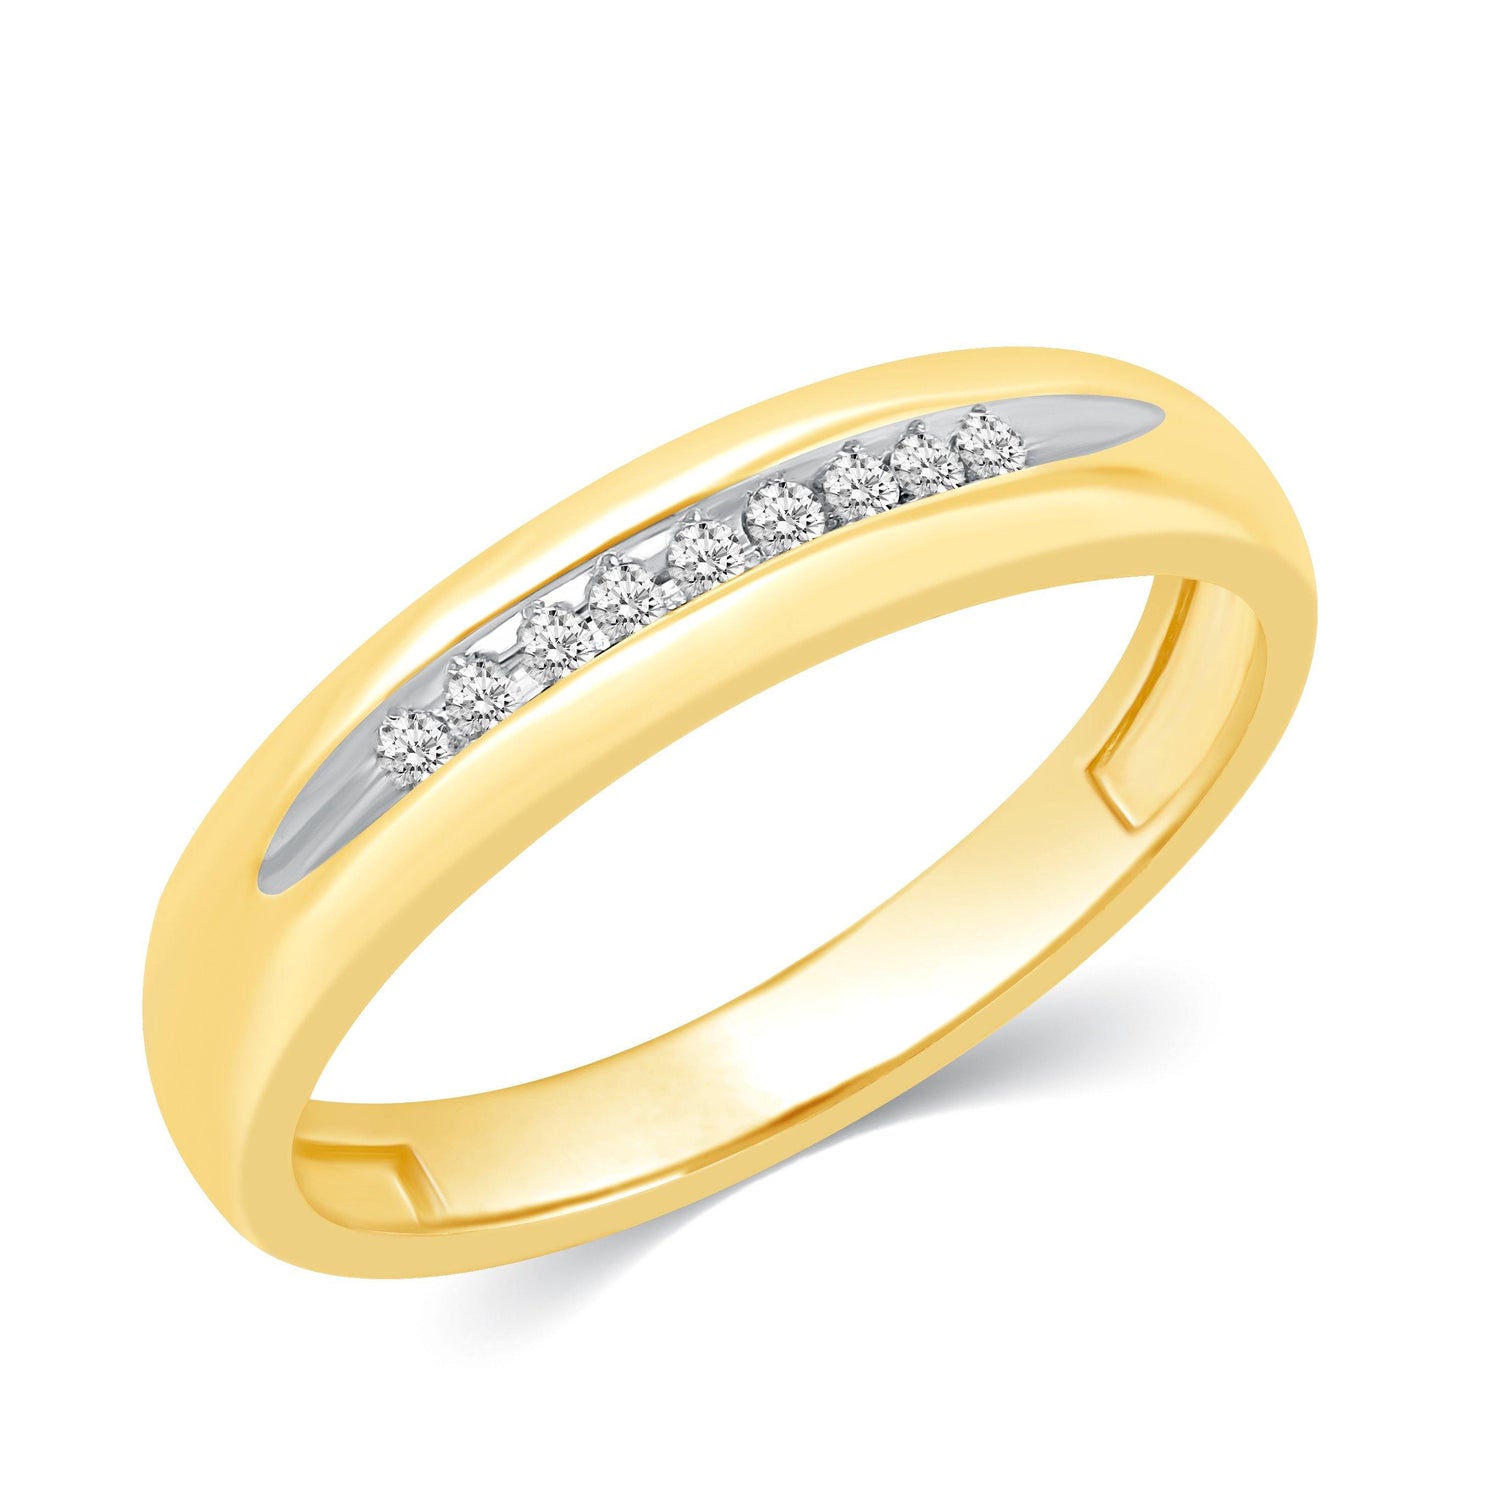 1/20CT TW Diamond Wedding Band set in 10KT Yellow gold - Fifth and Fine